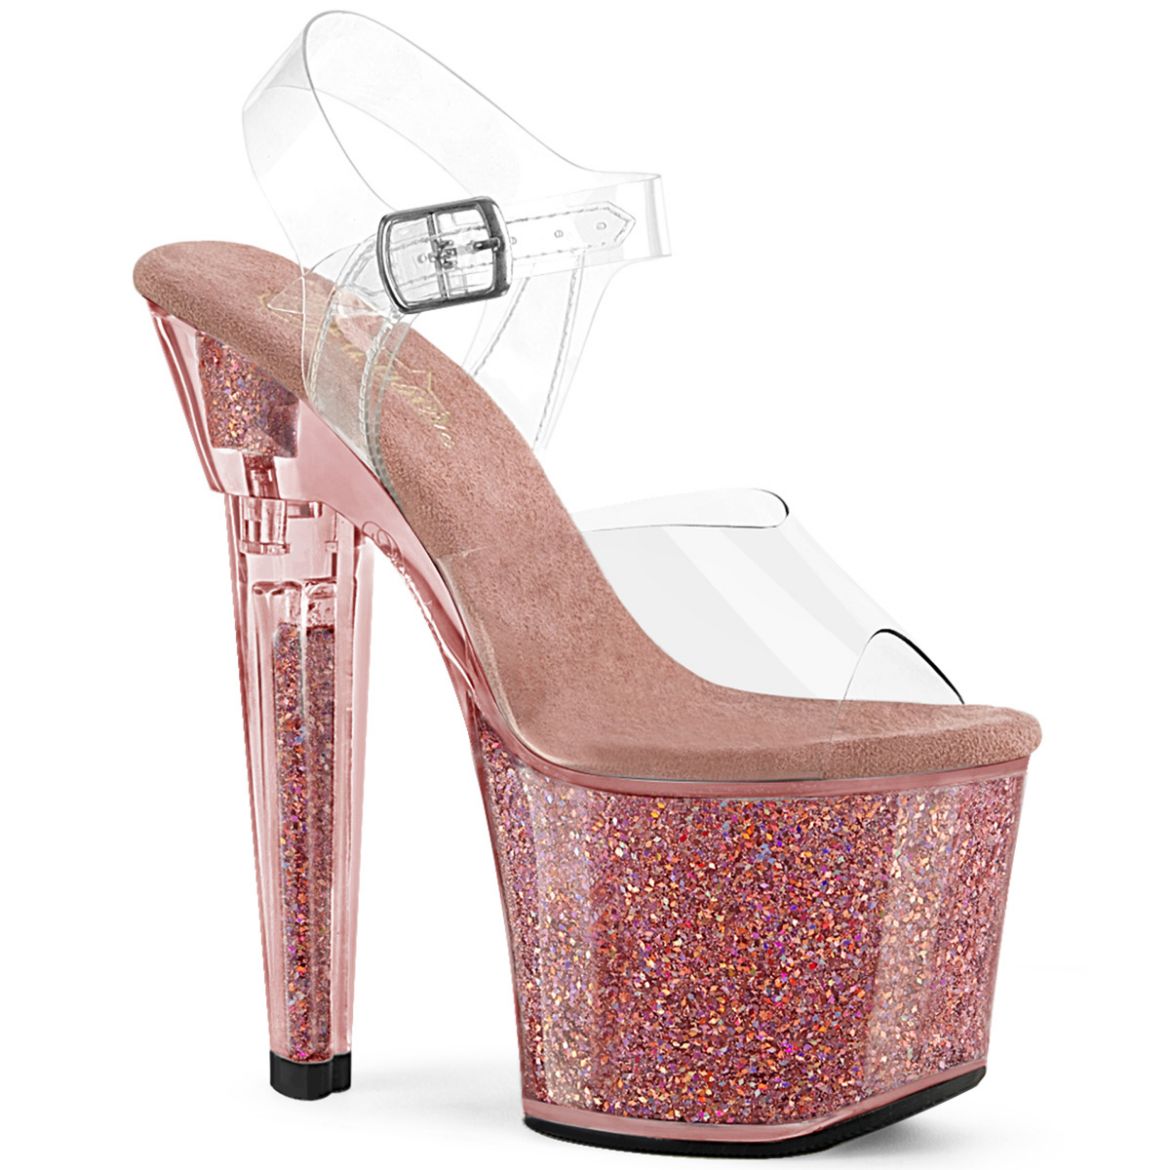 Product image of Pleaser LOVESICK-708SG Clr/Pink Multi Iridescent Glitters 7 Inch Heel 3 1/4 Inch PF Ankle Strap Sandal w/Iridescent Glitters